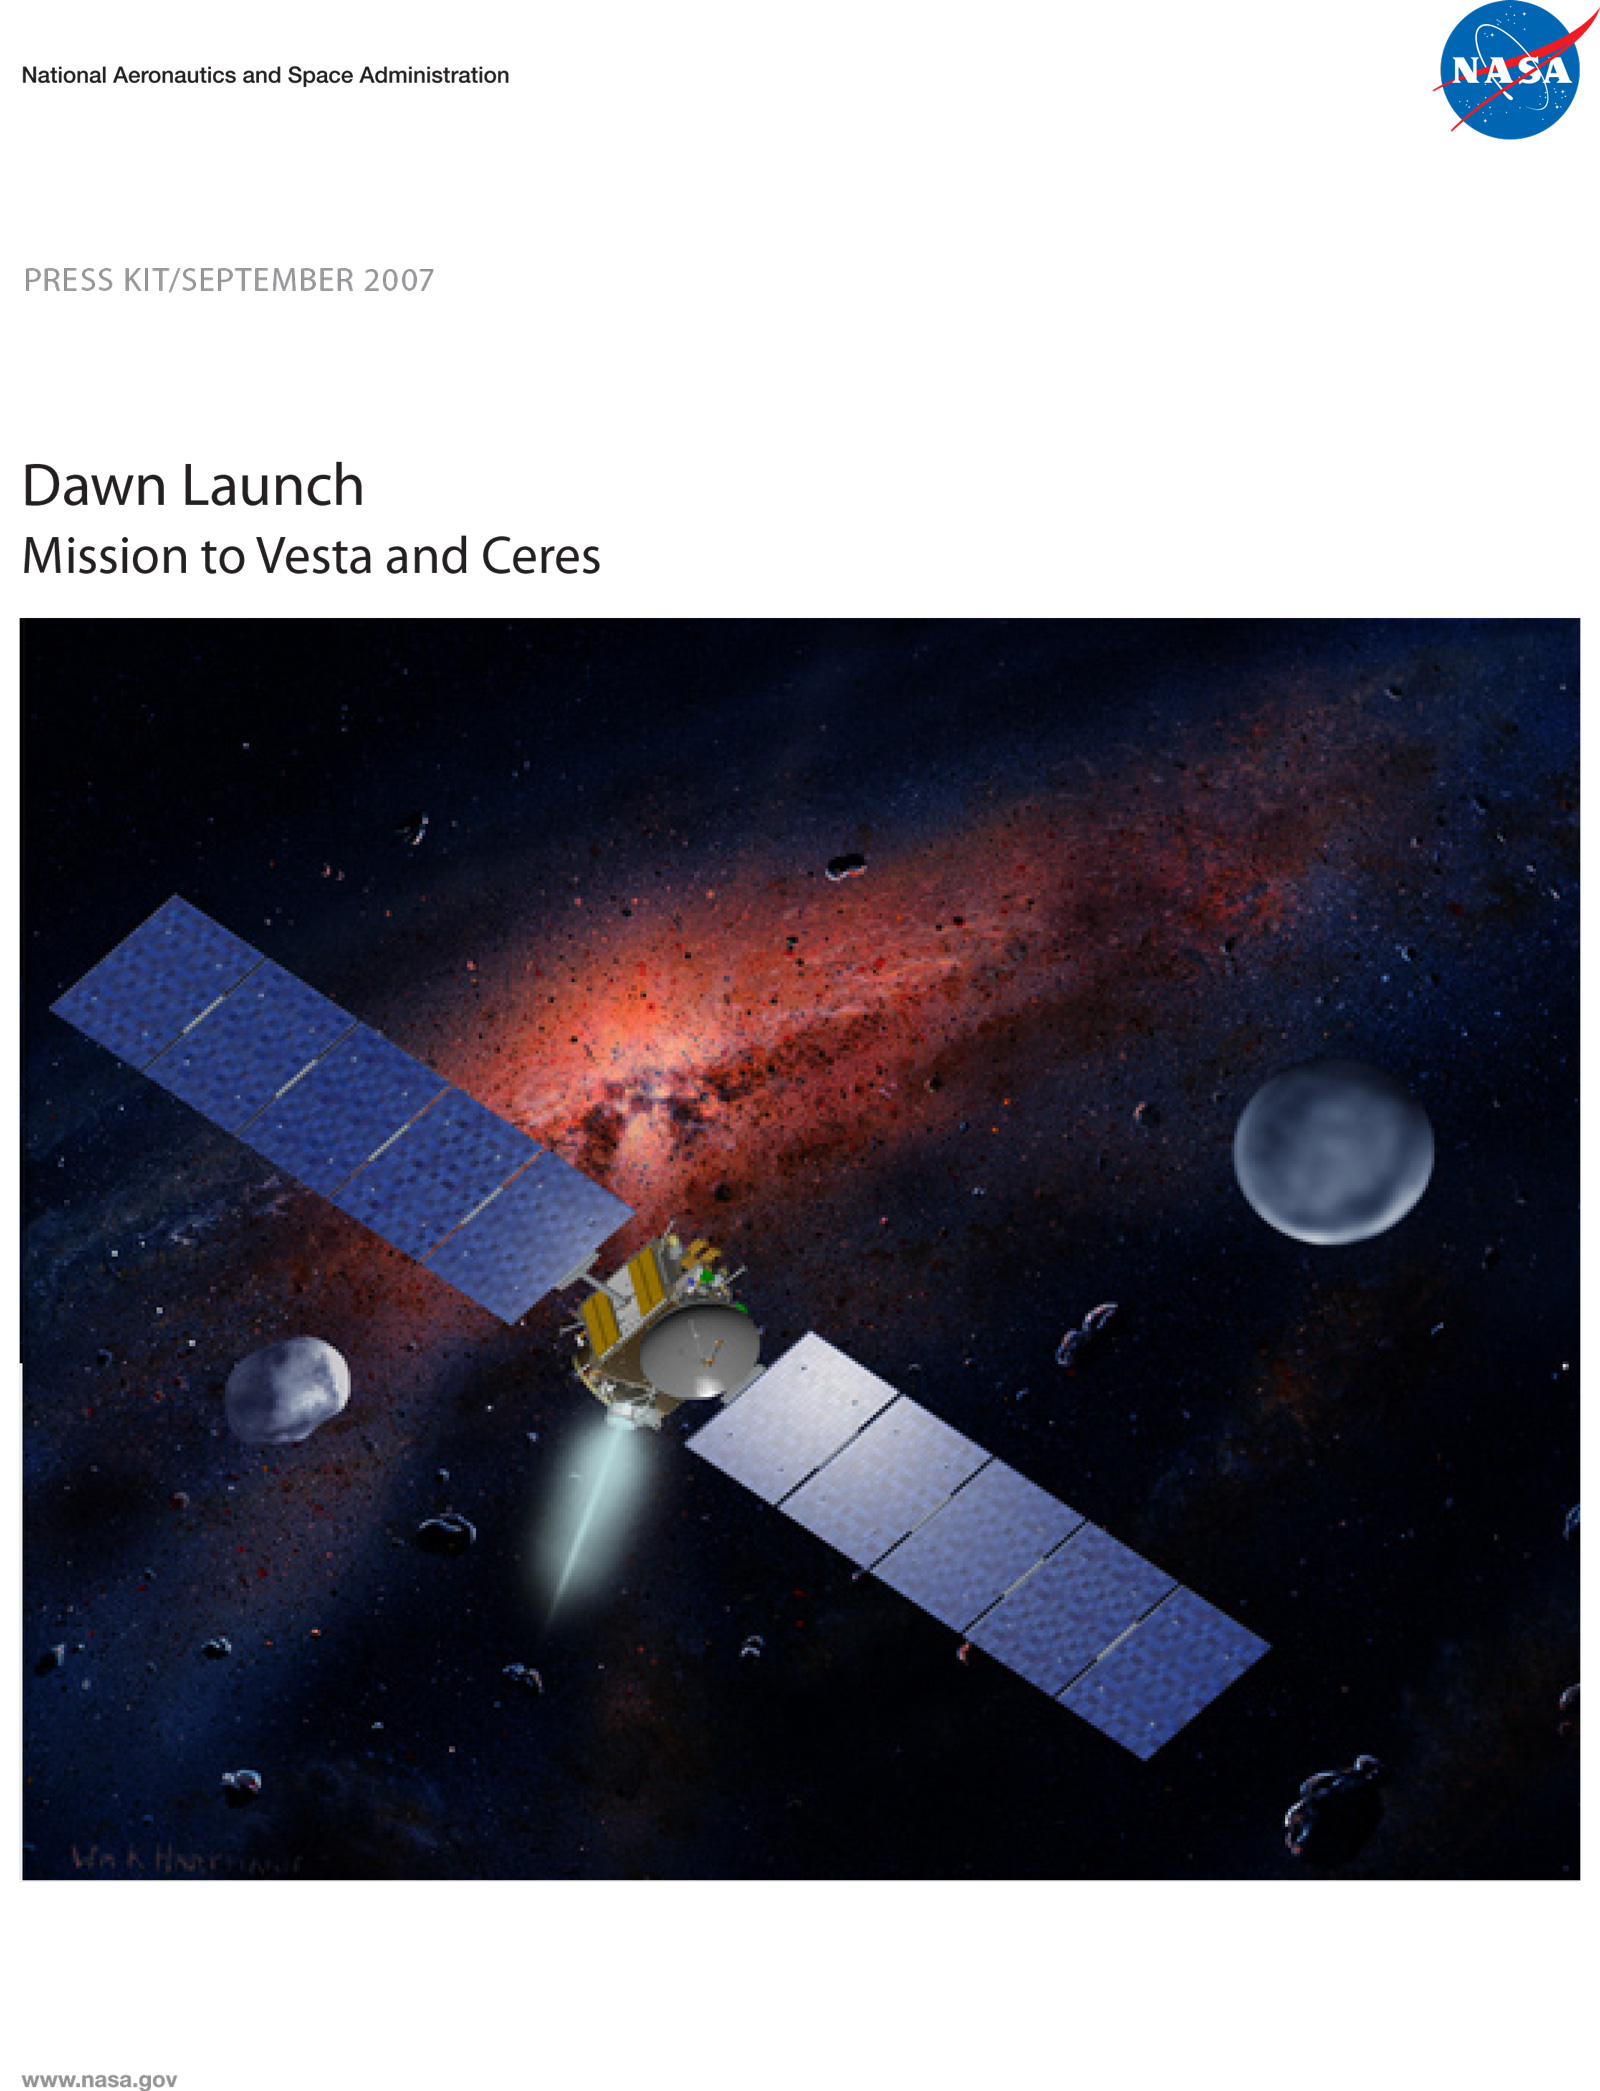 A guide to the Dawn spacecraft launch.